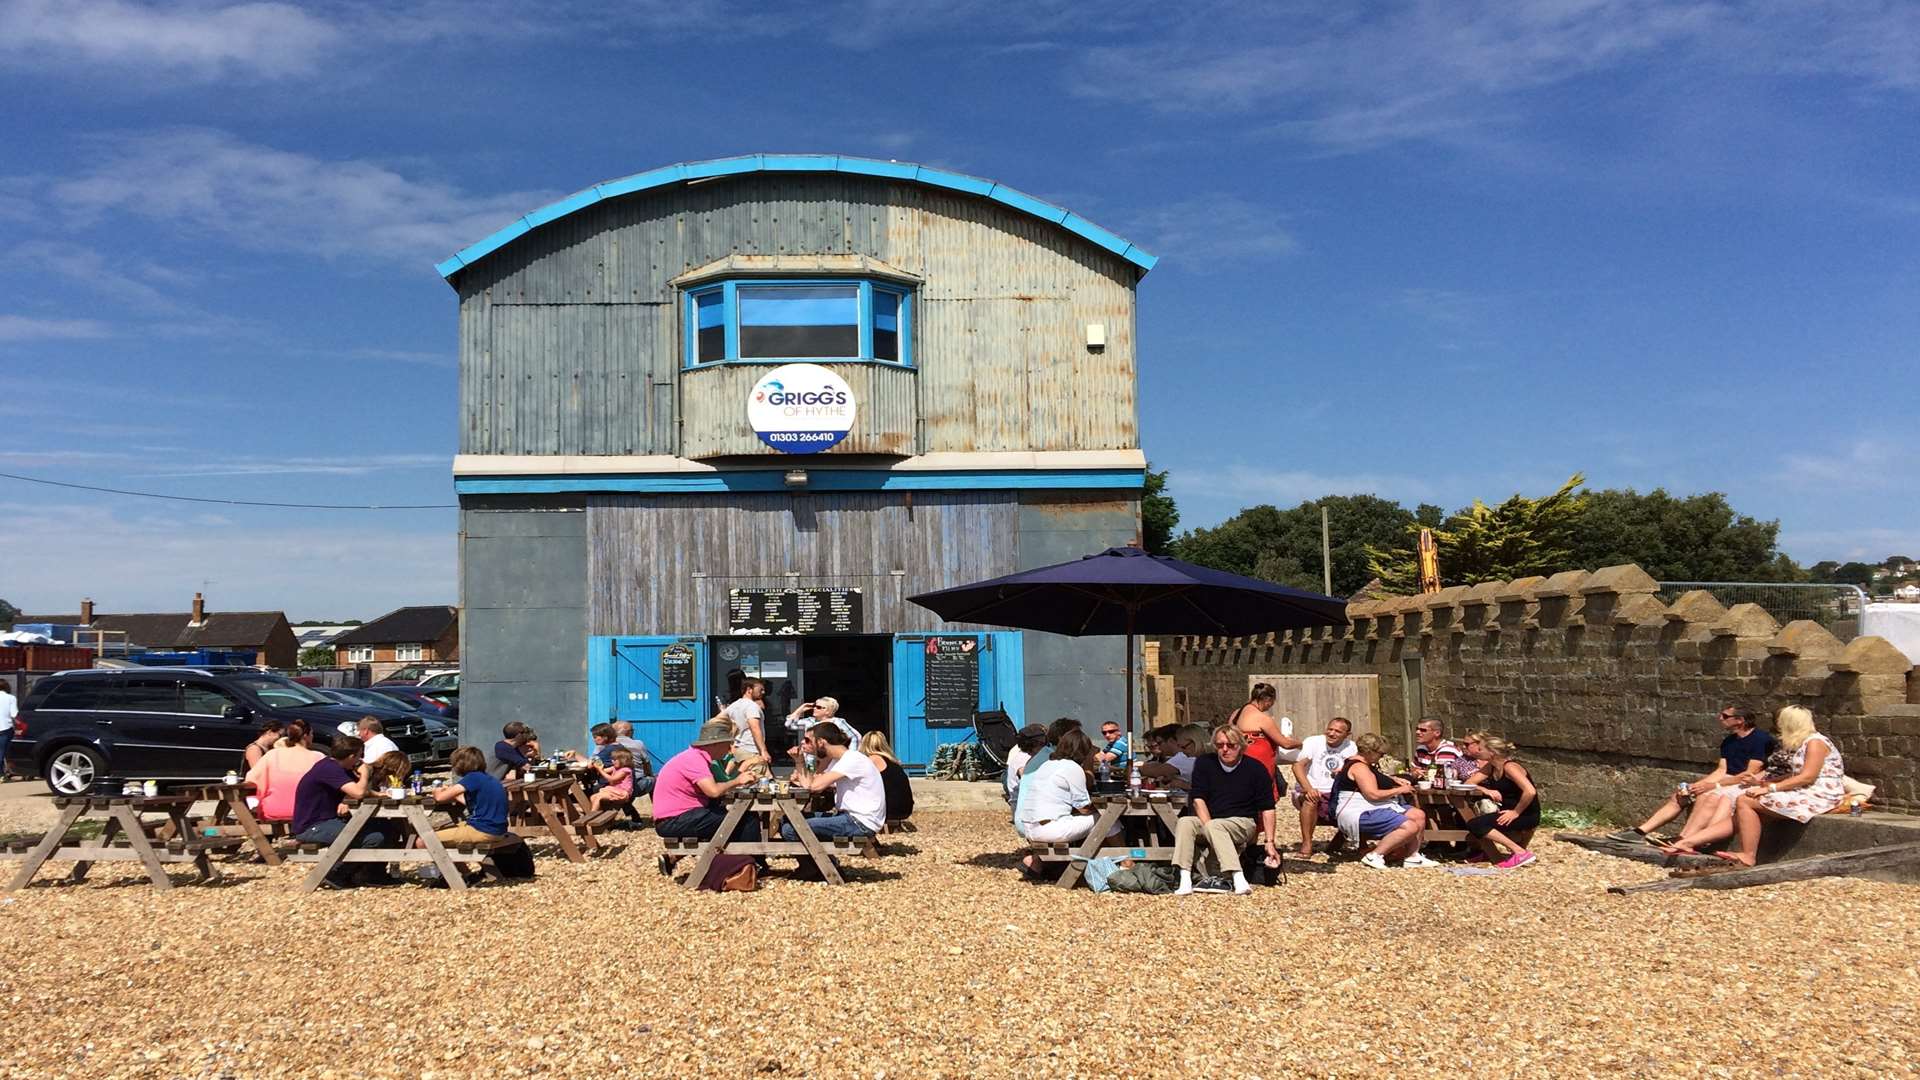 Griggs of Hythe serves brunch on theh beach